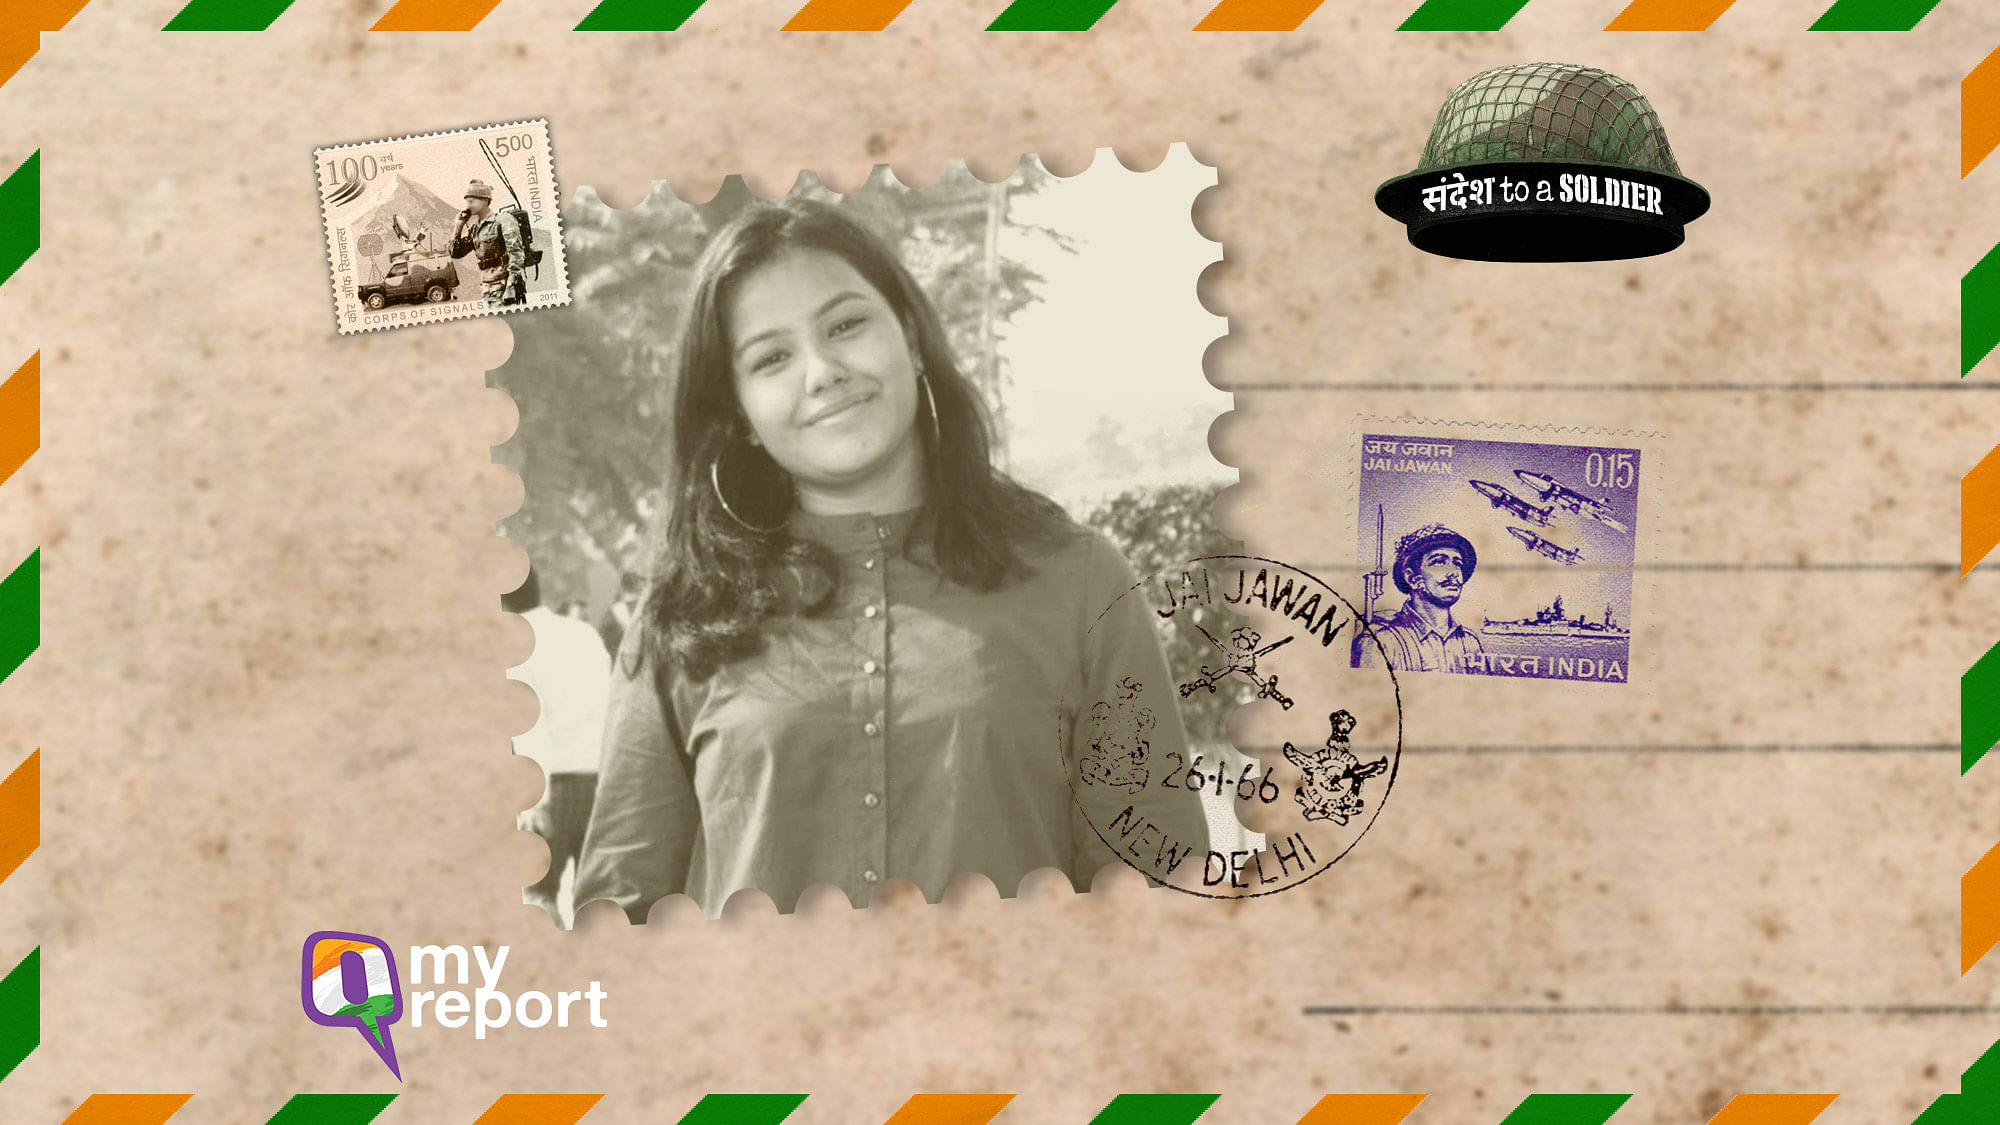 Induja Tyagi from Delhi sends her ‘Sandesh to a Soldier’.